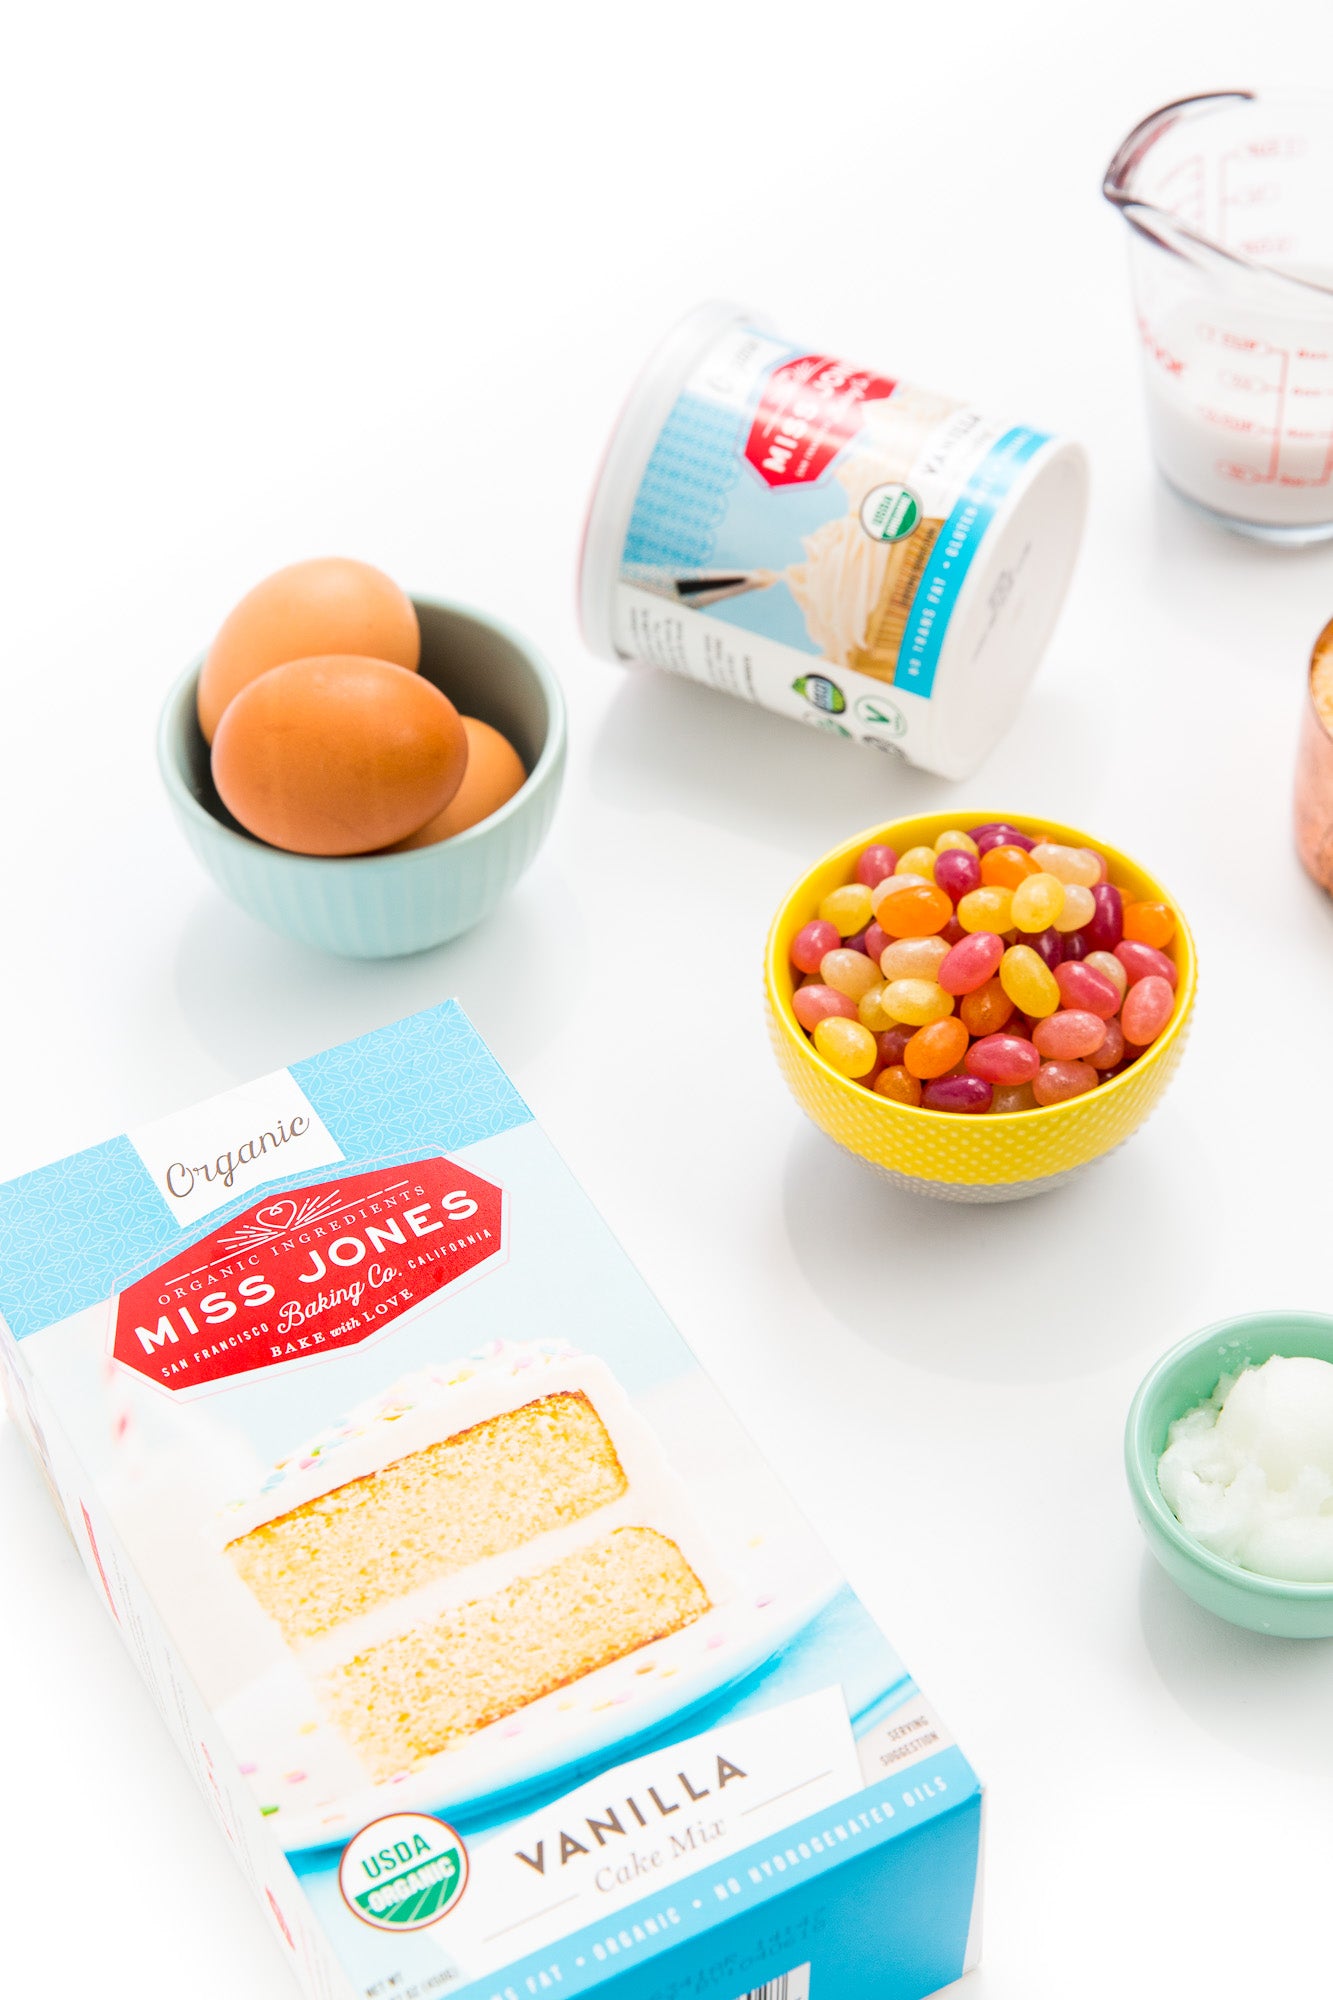 Image of a box of Miss Jones Vanilla Cake Mix, a bowl of three eggs, a bowl of jellybeans, a jar of Miss Jones Vanilla Frosting, and a bowl of coconut oil for Miss Jones Baking Co Toasted Coconut Easter Egg Nest Cupcakes recipe